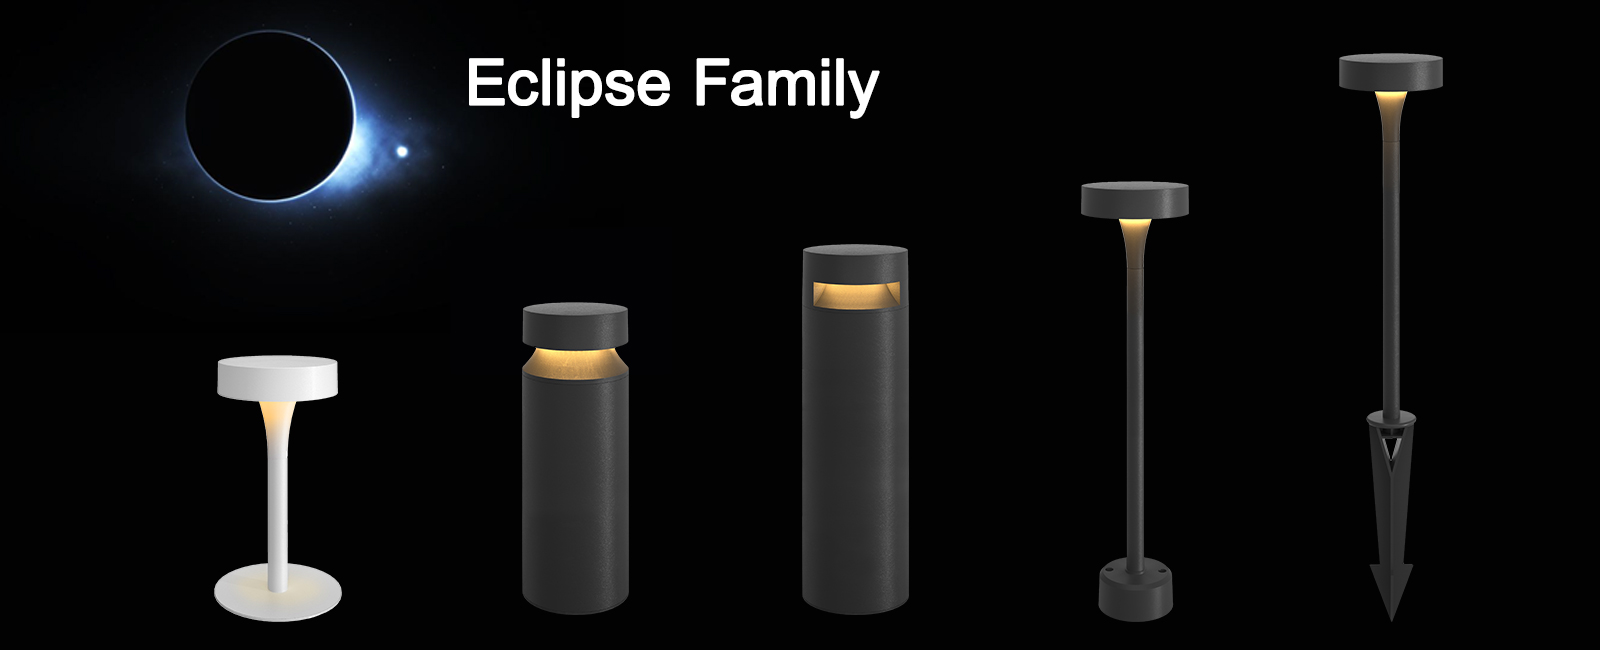 Eclipse family